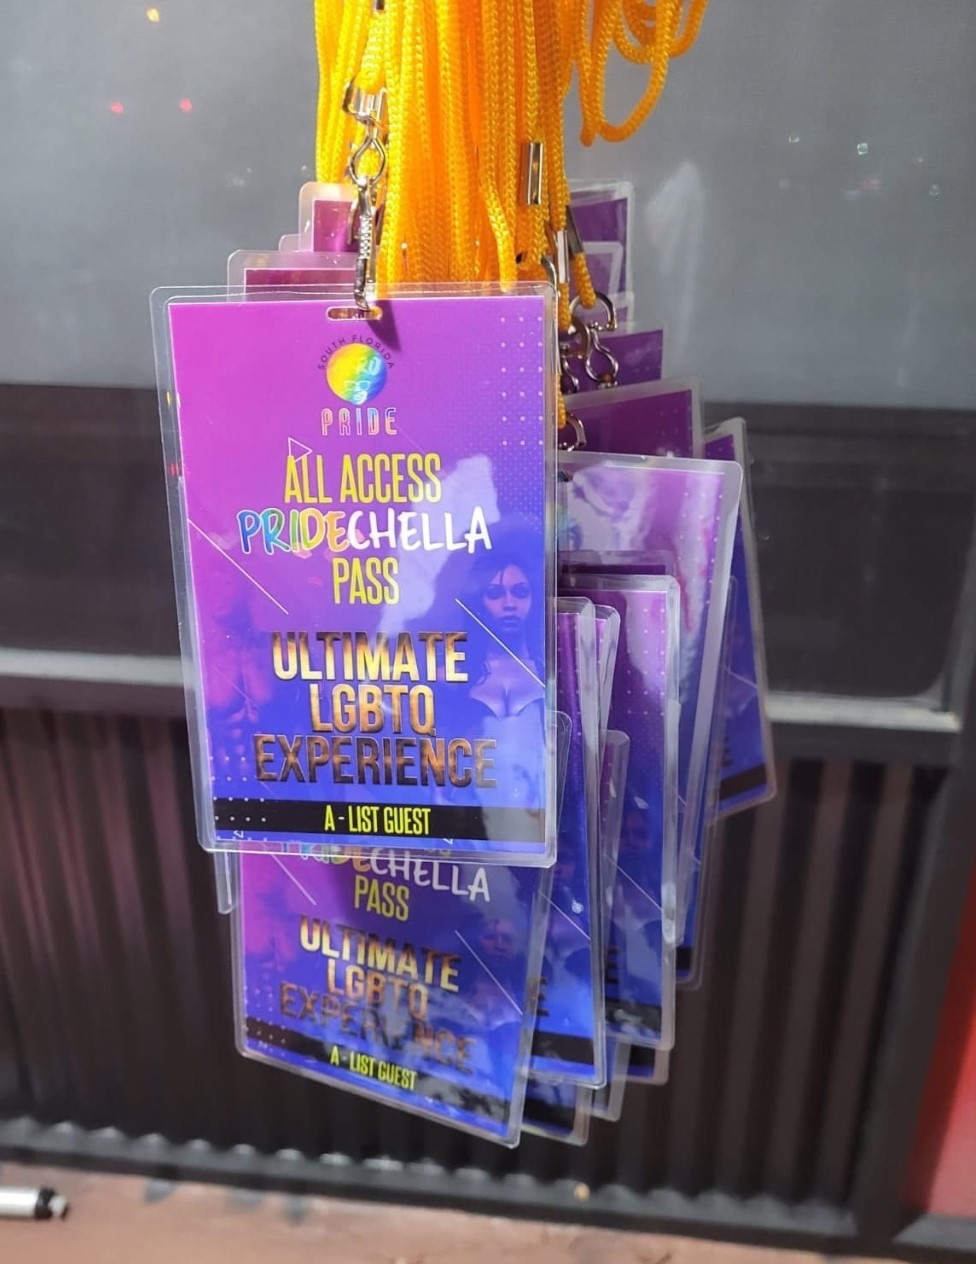 All Access Pass the Ultimate LGBTQ+ Experience All Access Passes exclude the Deviant Party & Boat Party on may. 23, 16:00@All Acess - Compra entradas y obtén información enAfro Pride Federation pridechillamusicfestival